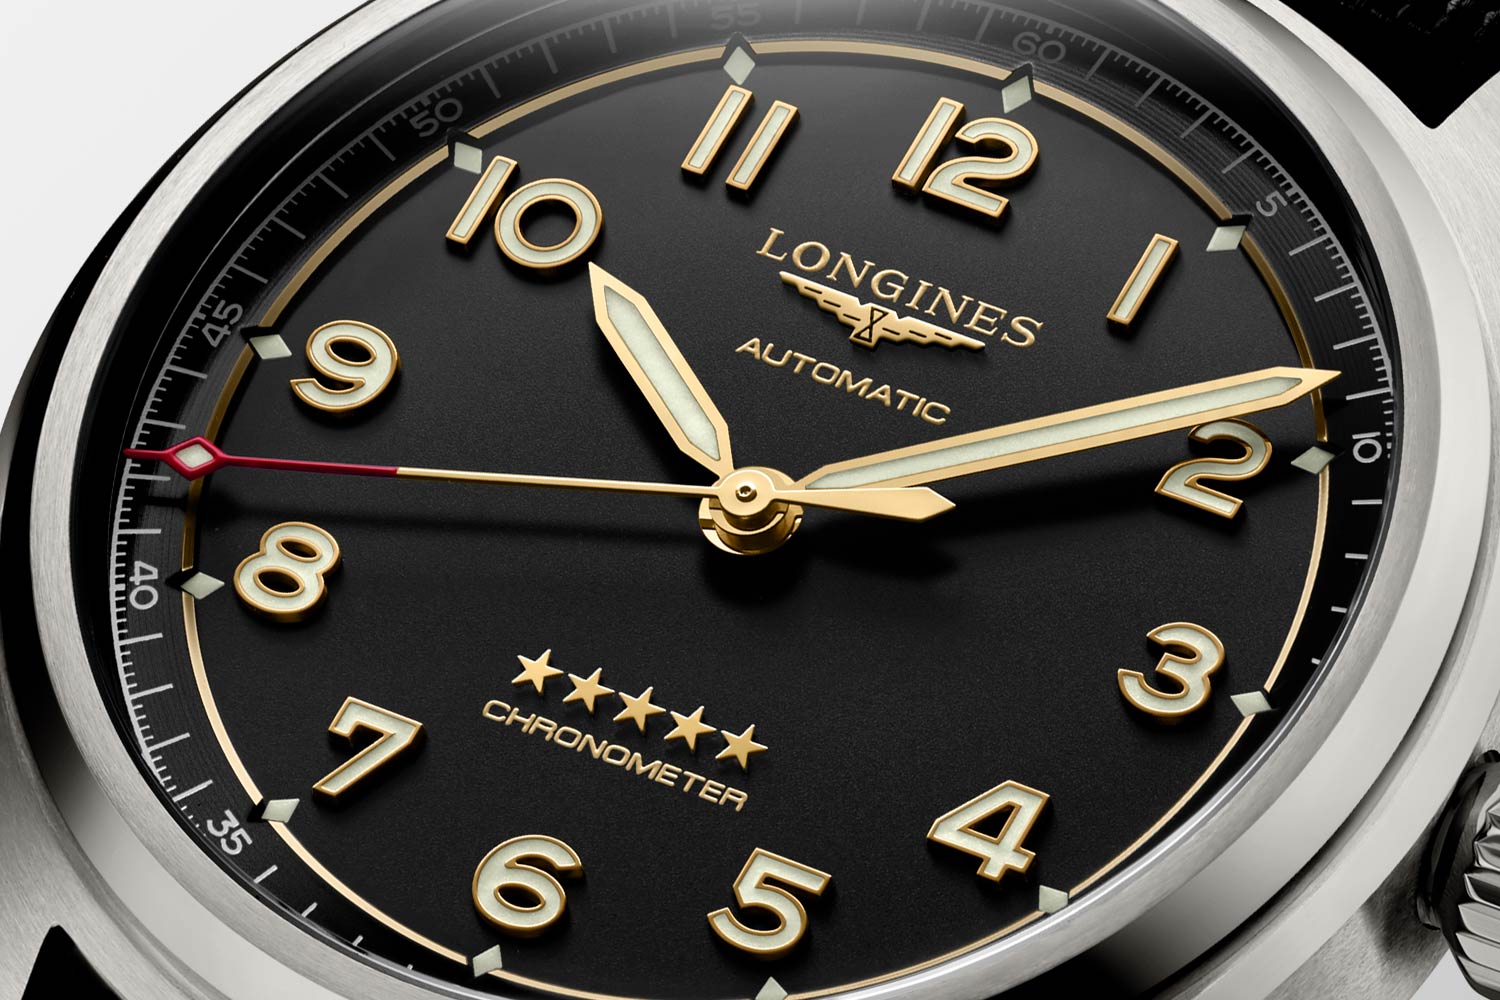 The five stars stamped on the dial represent the brand’s dedication to quality and reliability, and the watches come with a 5-year warranty.